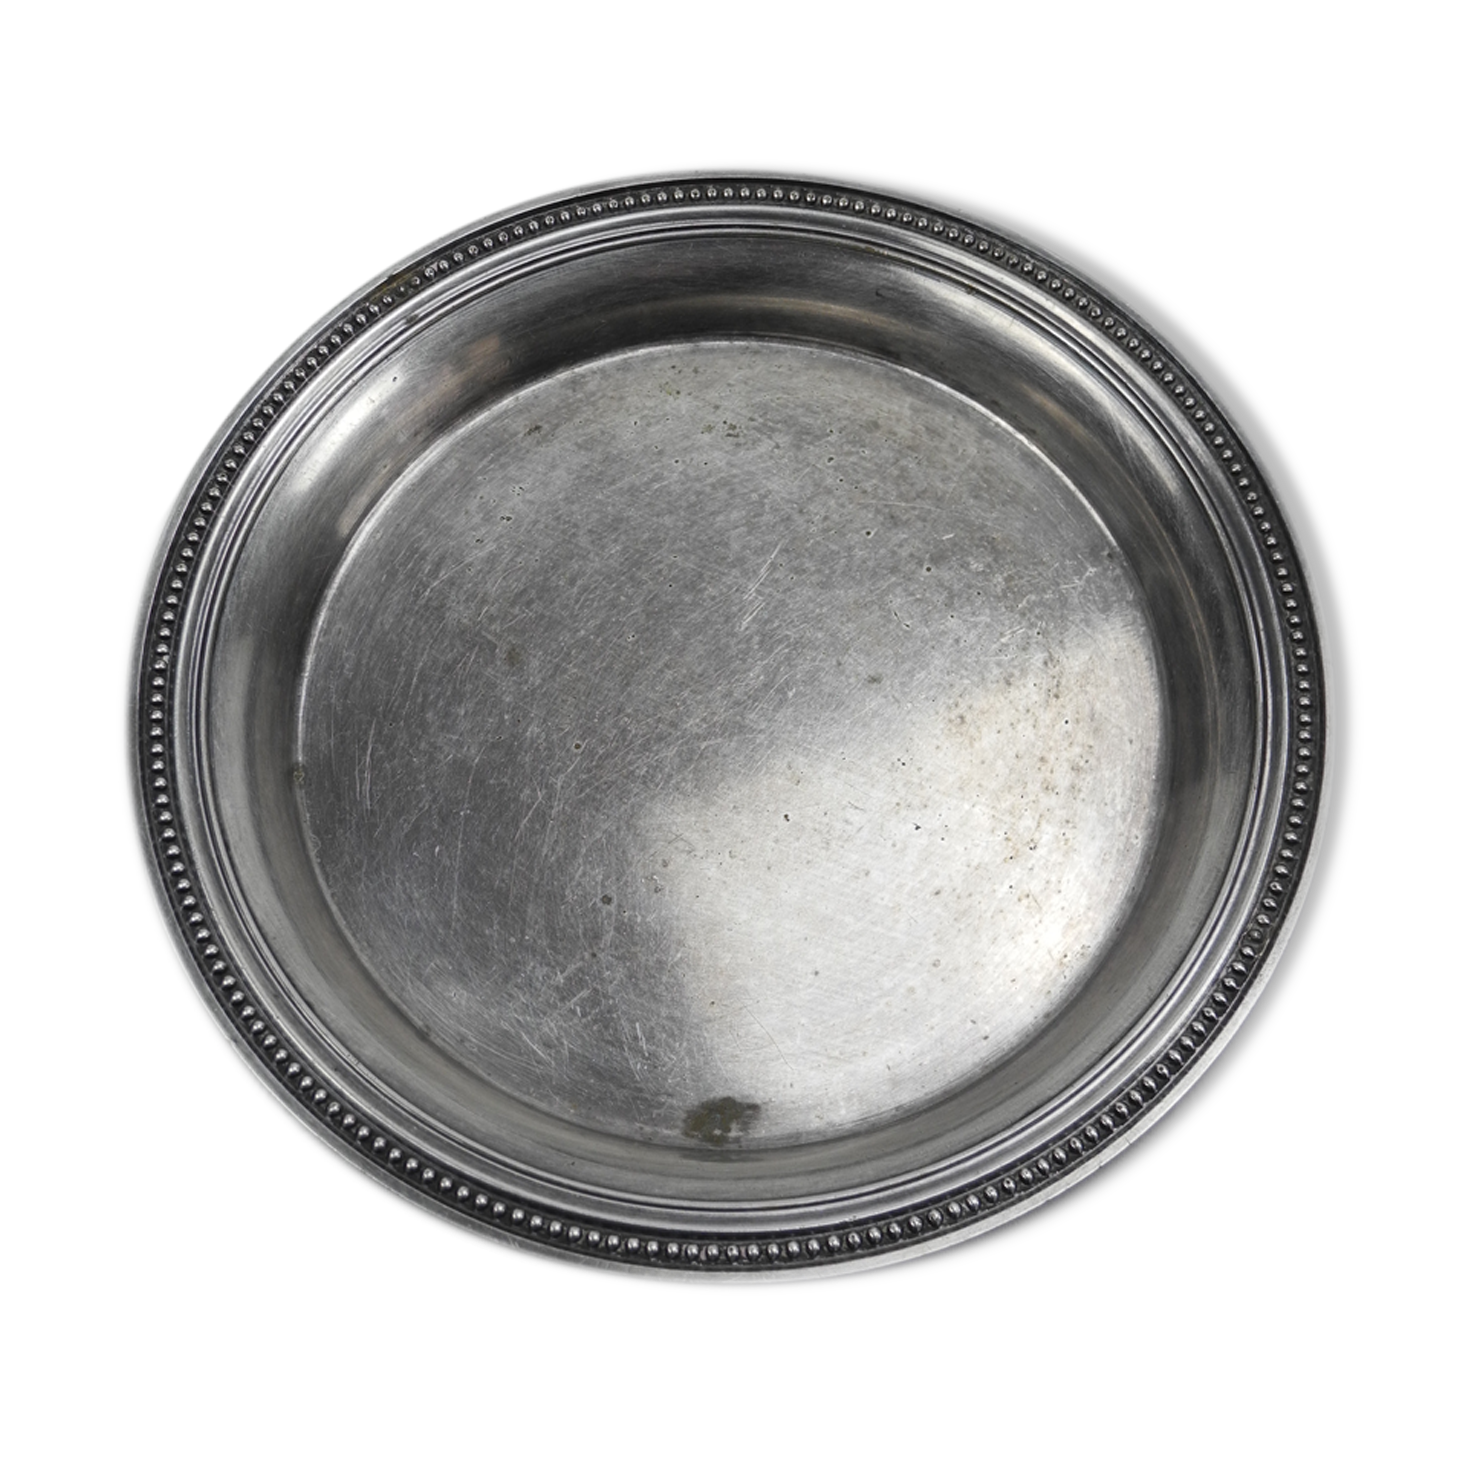 Christofle soucoupe dessous bouteille Christofle french silver metal bottle coaster silber 